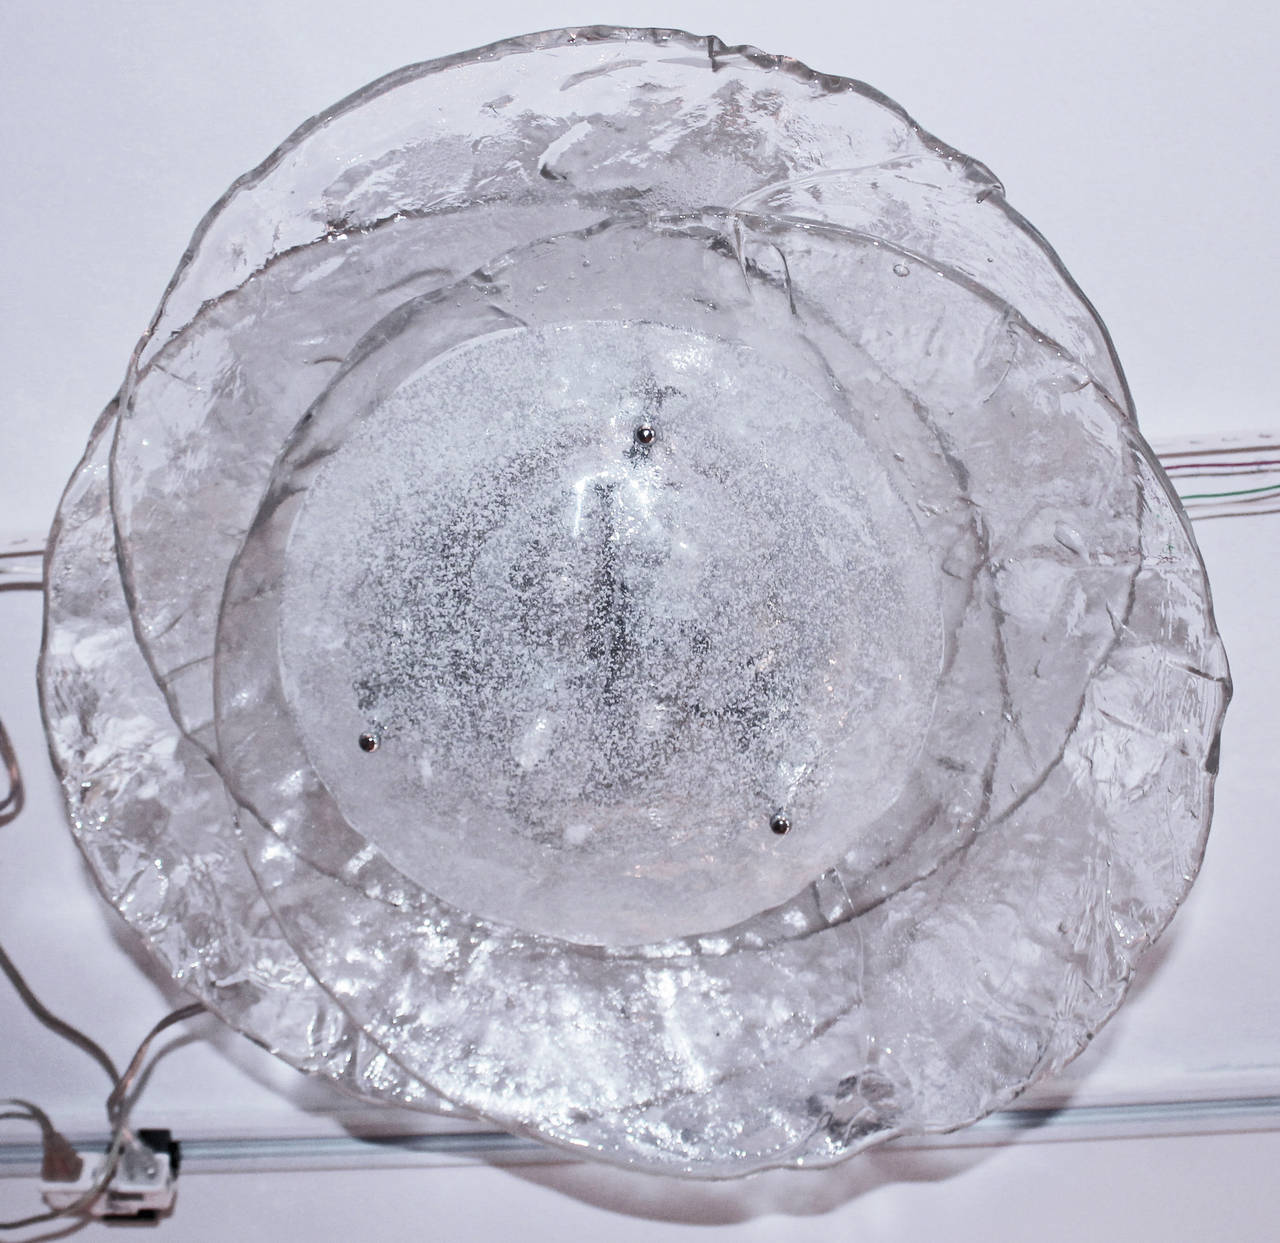 Very beautiful flush mount ceiling light made using three irregular clear handblown glass discs protruding in different directions. The area containing the lamp sockets is closed with a 